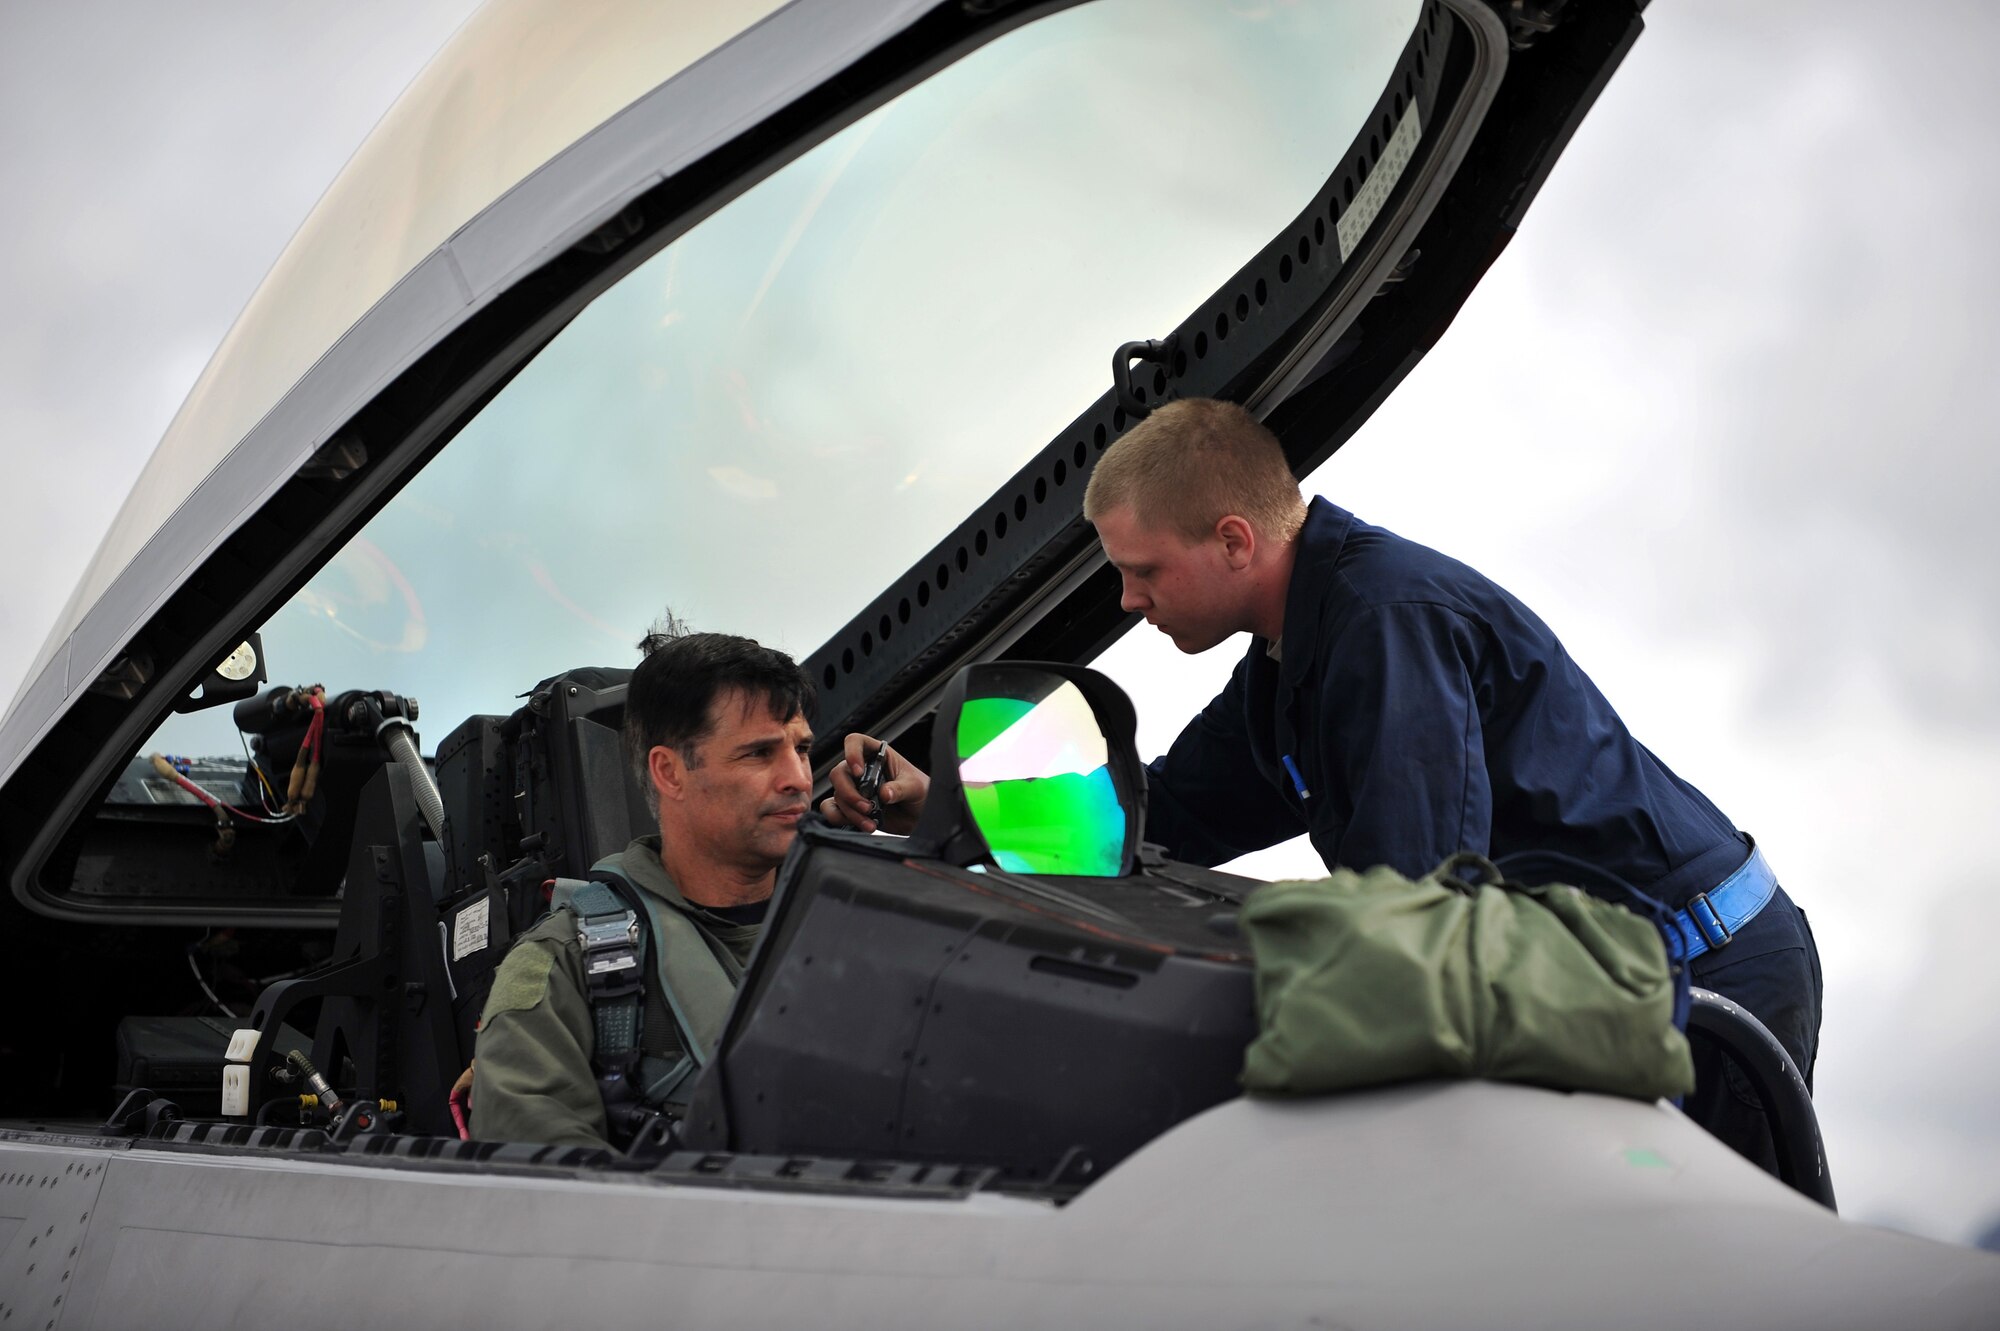 Airman 1st Class Shane Brewster straps Lt. Col. John Hillyer into his F-22 Raptor fighter aircraft June 17, 2009, during Northern Edge 09 held at Elmendorf Air Force Base, Alaska. Brewster is a member of the 525th Aircraft Maintenance Unit and Hillyer is the 477th Fighter Group commander at Elmendorf AFB. Northern Edge is Alaska's largest military training exercise that prepares joint forces to respond to crises throughout the Asia-Pacific region. (U.S. Air Force photo/Master Sgt. Shane A. Cuomo)
